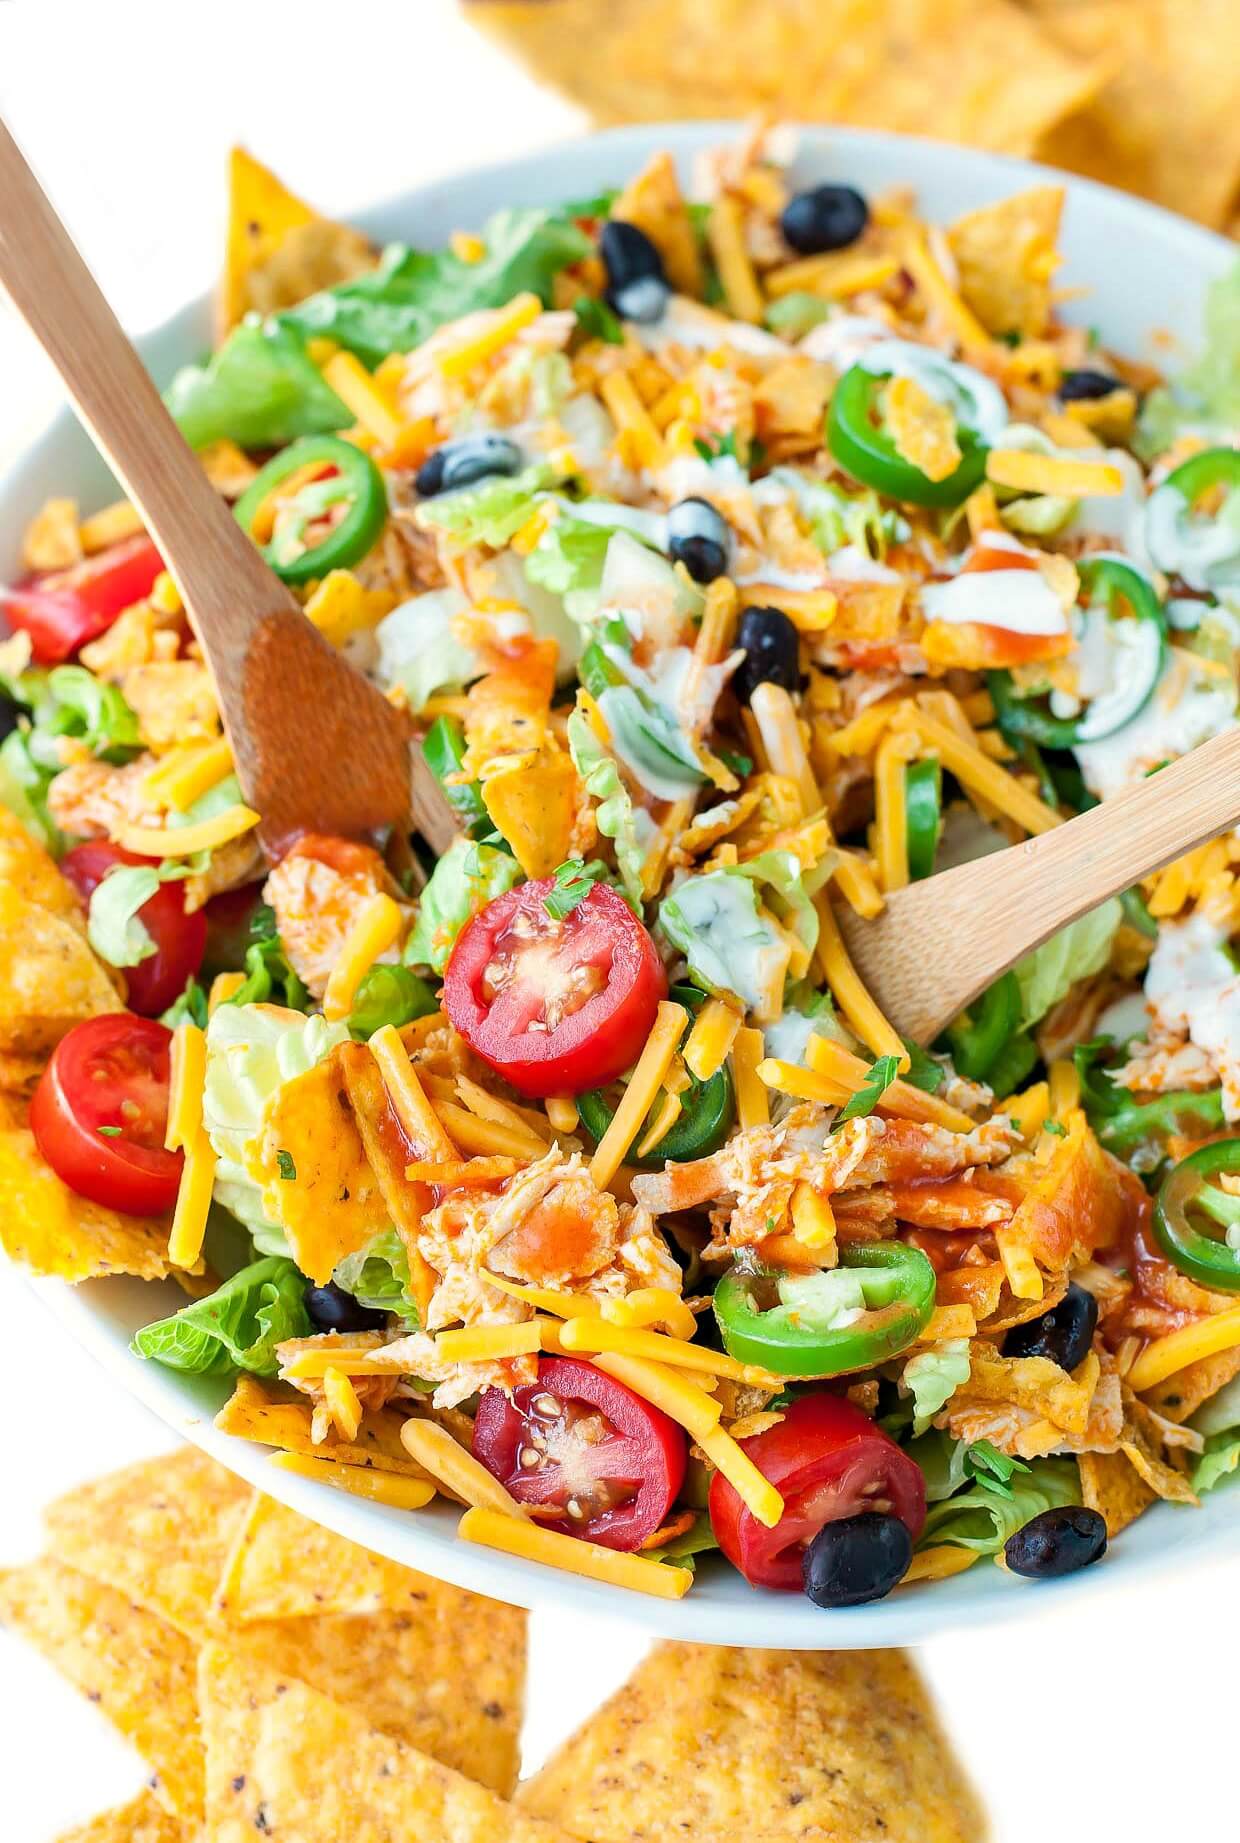 17 Delicious Salad Recipes That Will Change Your (Lunch) Life
